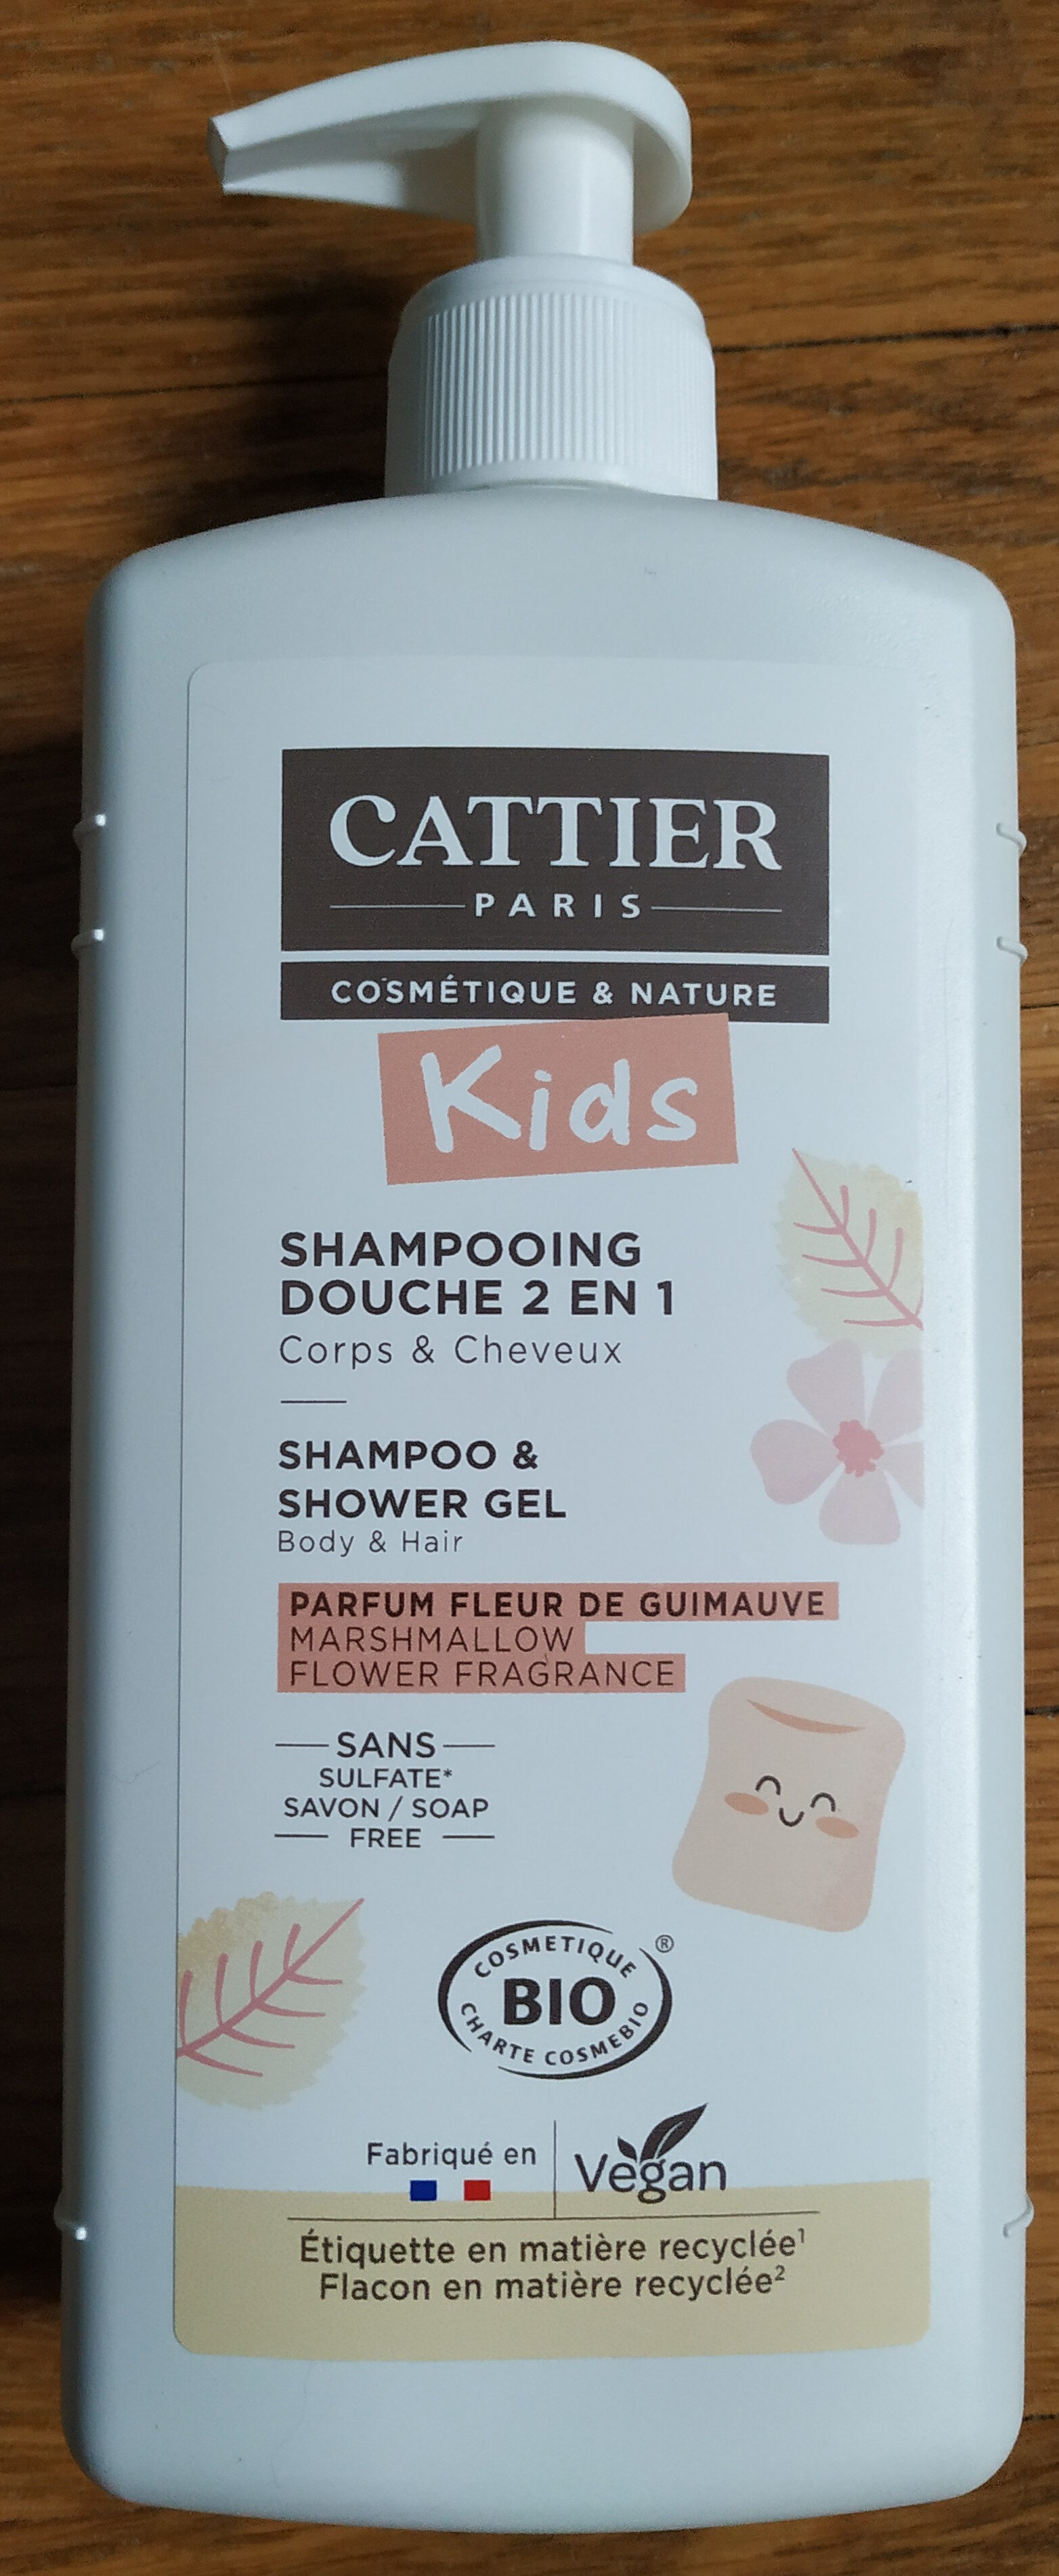 Kids - Shampooing douche 2 en 1 - Tuote - fr